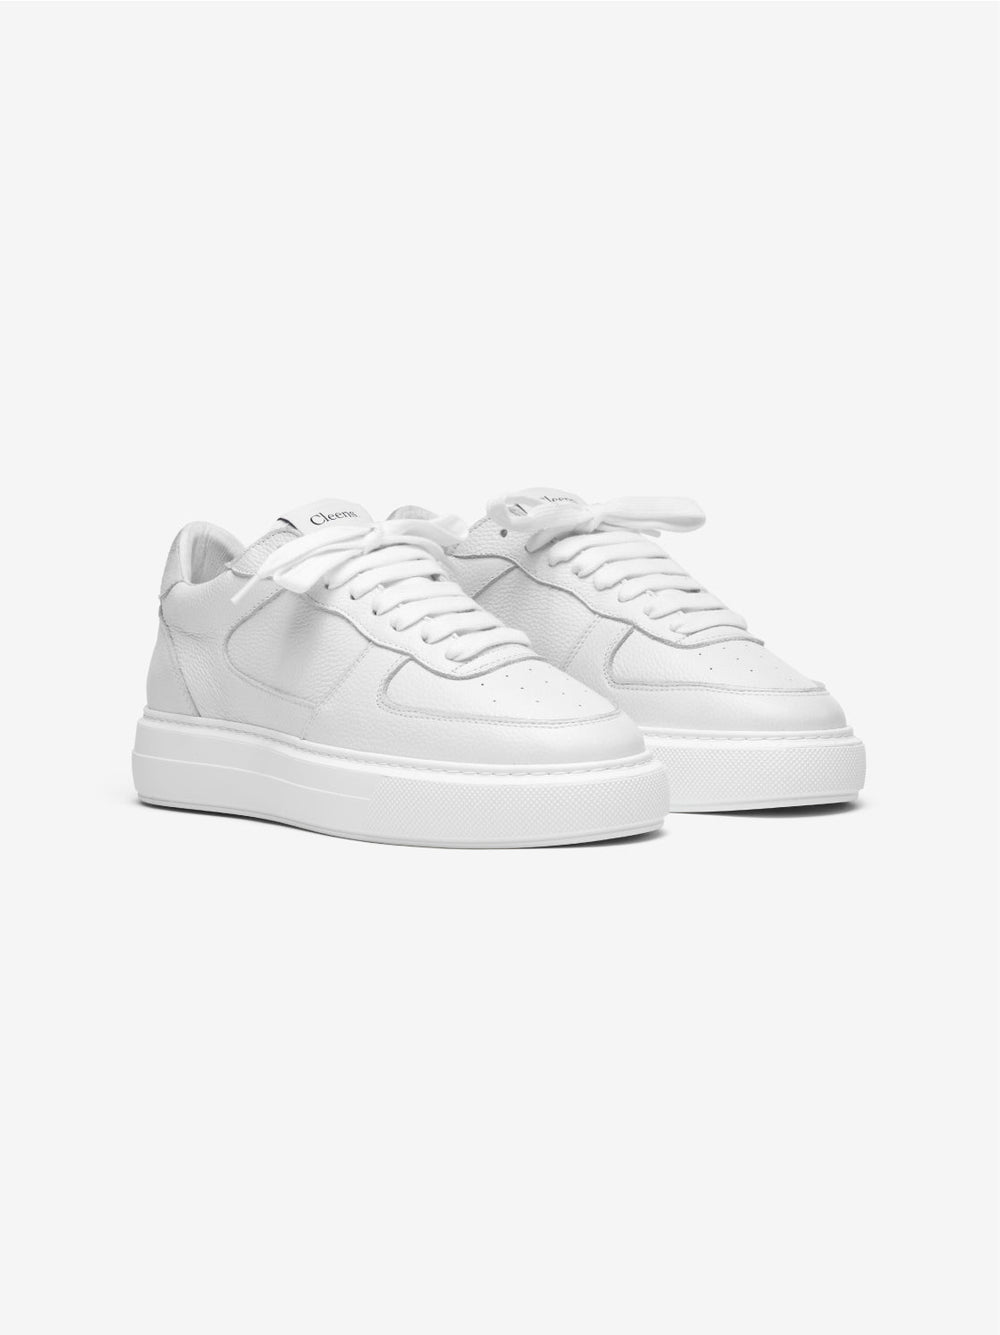 Court Trainer Triple White Tumbled leather-2